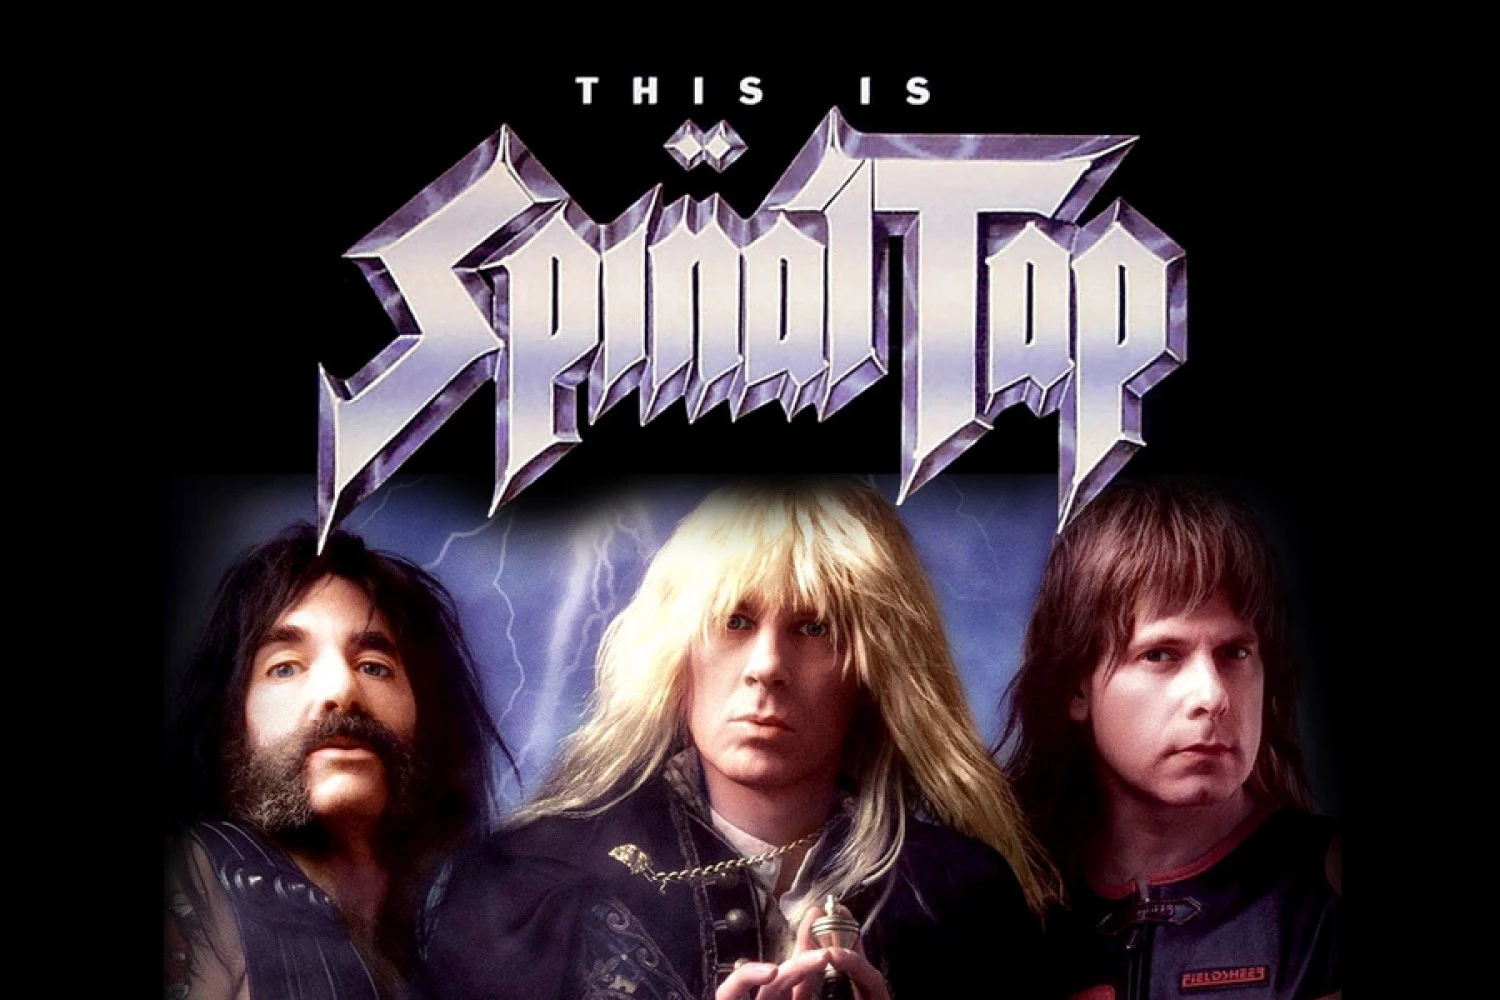 3/2/1984: 'This is Spinal Tap' was Released in Theatres